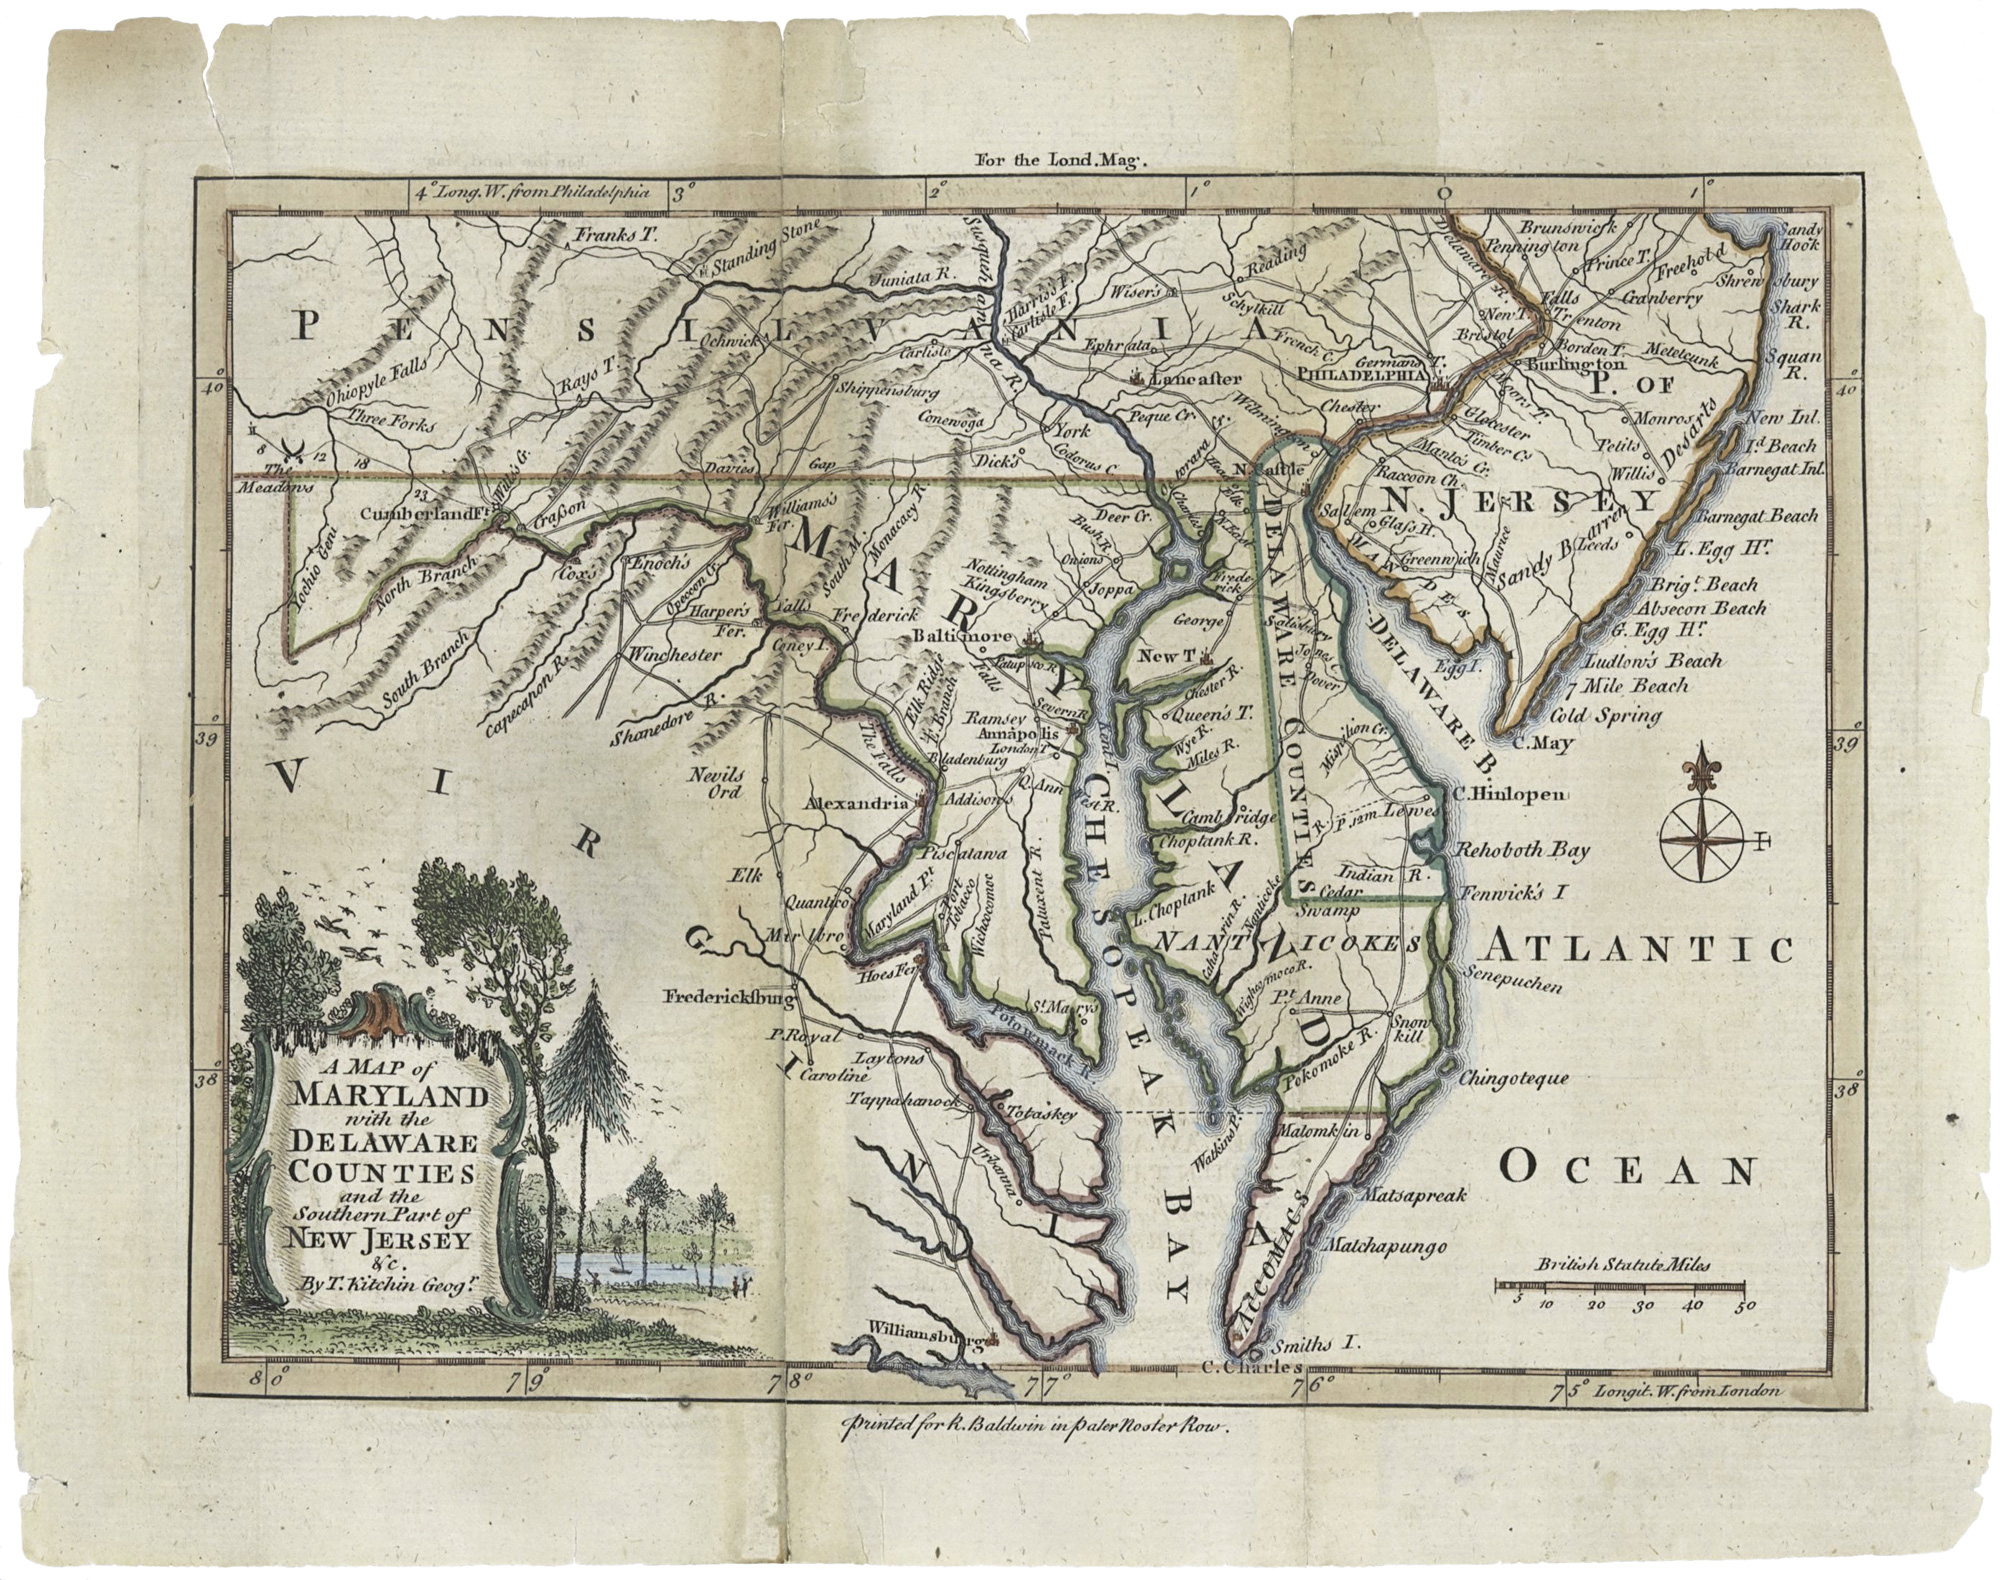 Thomas Kitchin (d. 1784), A Map of Maryland with the Delaware Counties and the Southern Part of New Jersey